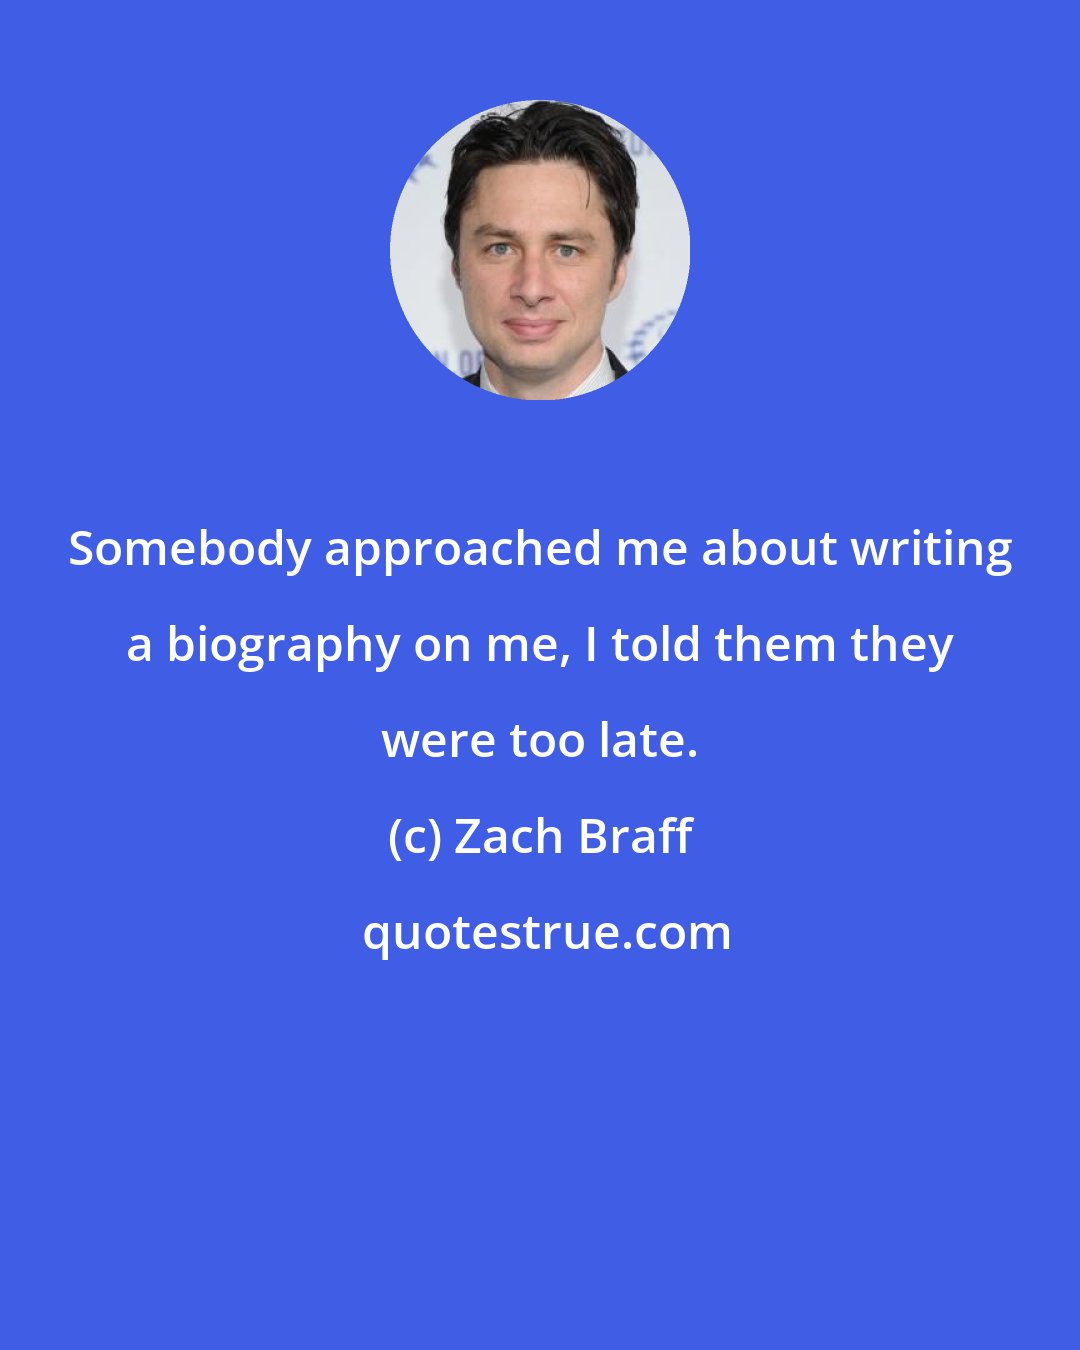 Zach Braff: Somebody approached me about writing a biography on me, I told them they were too late.